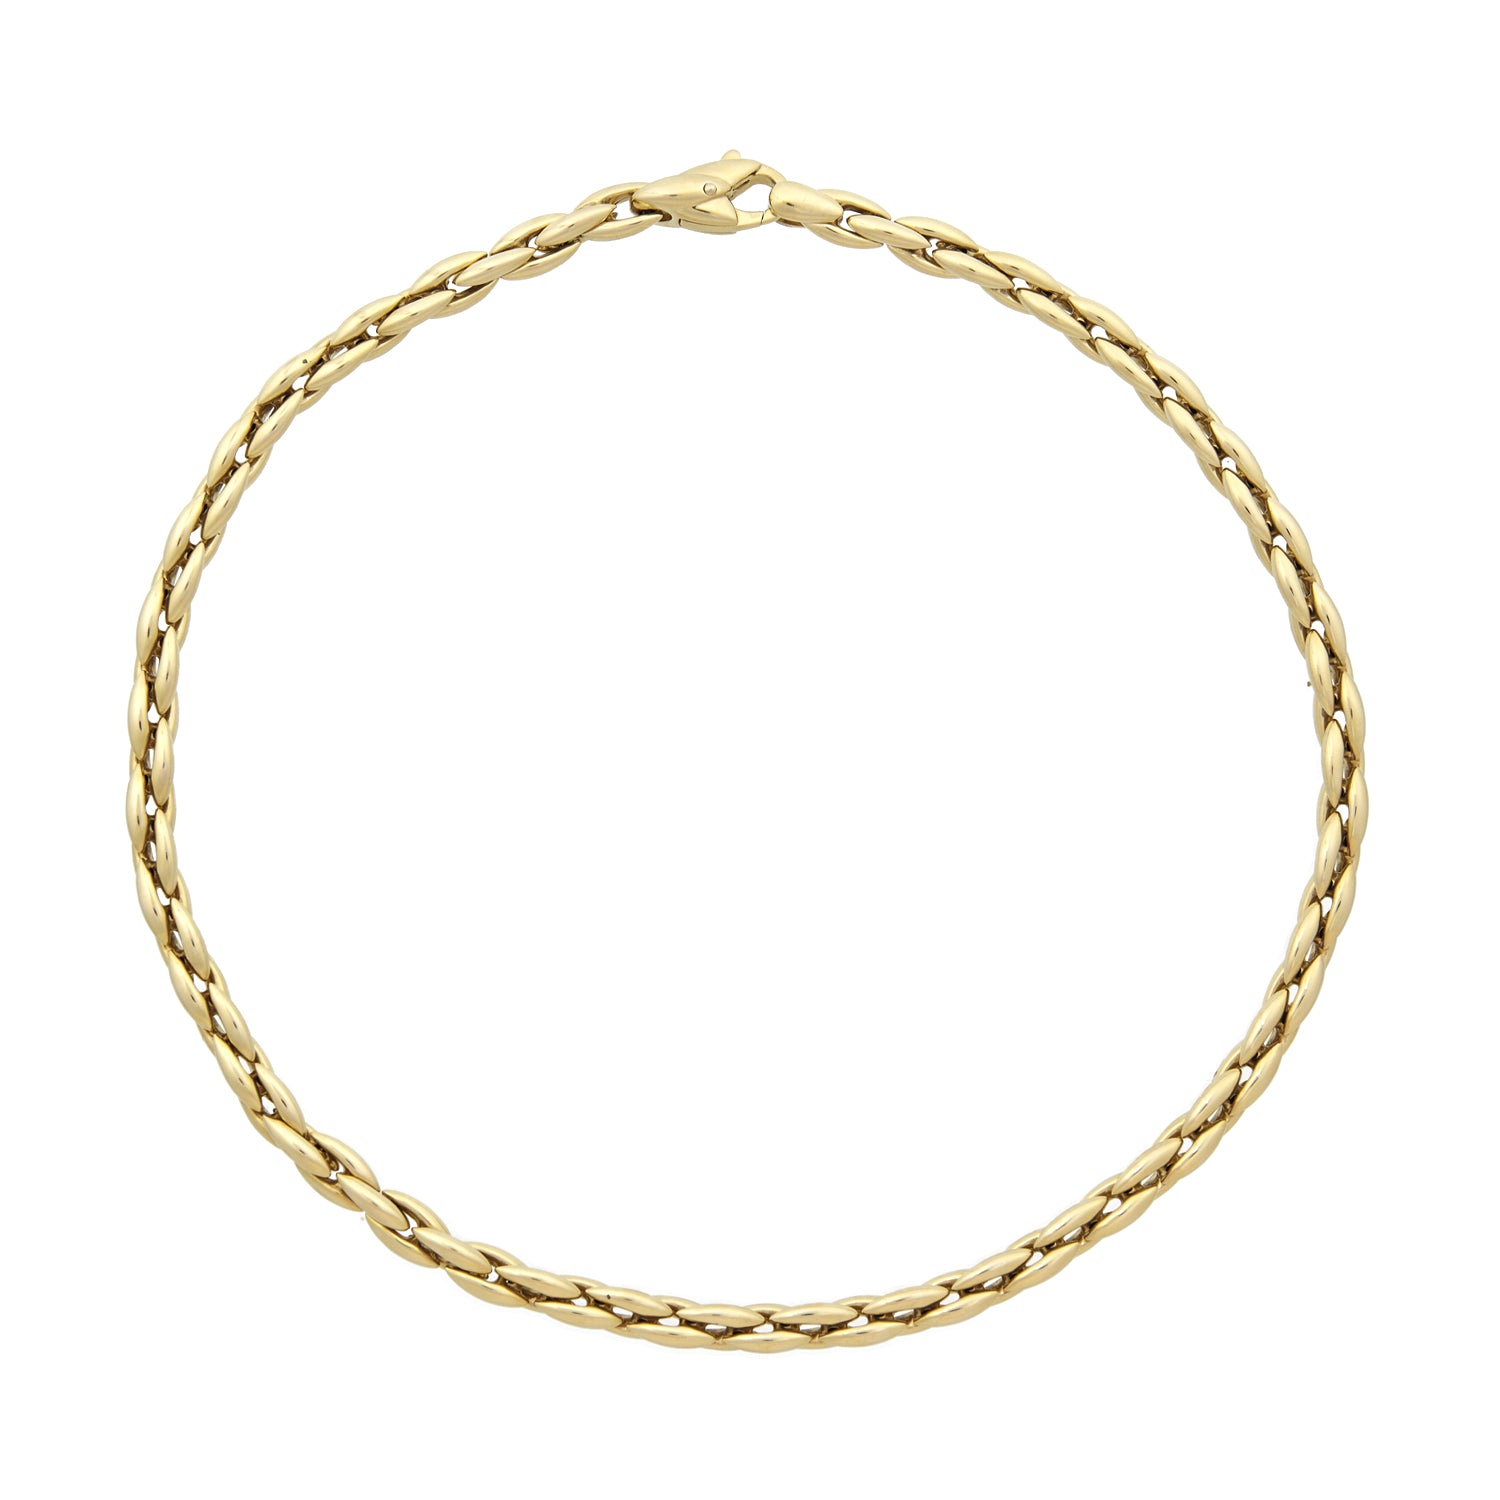 Yellow gold necklace palmier link